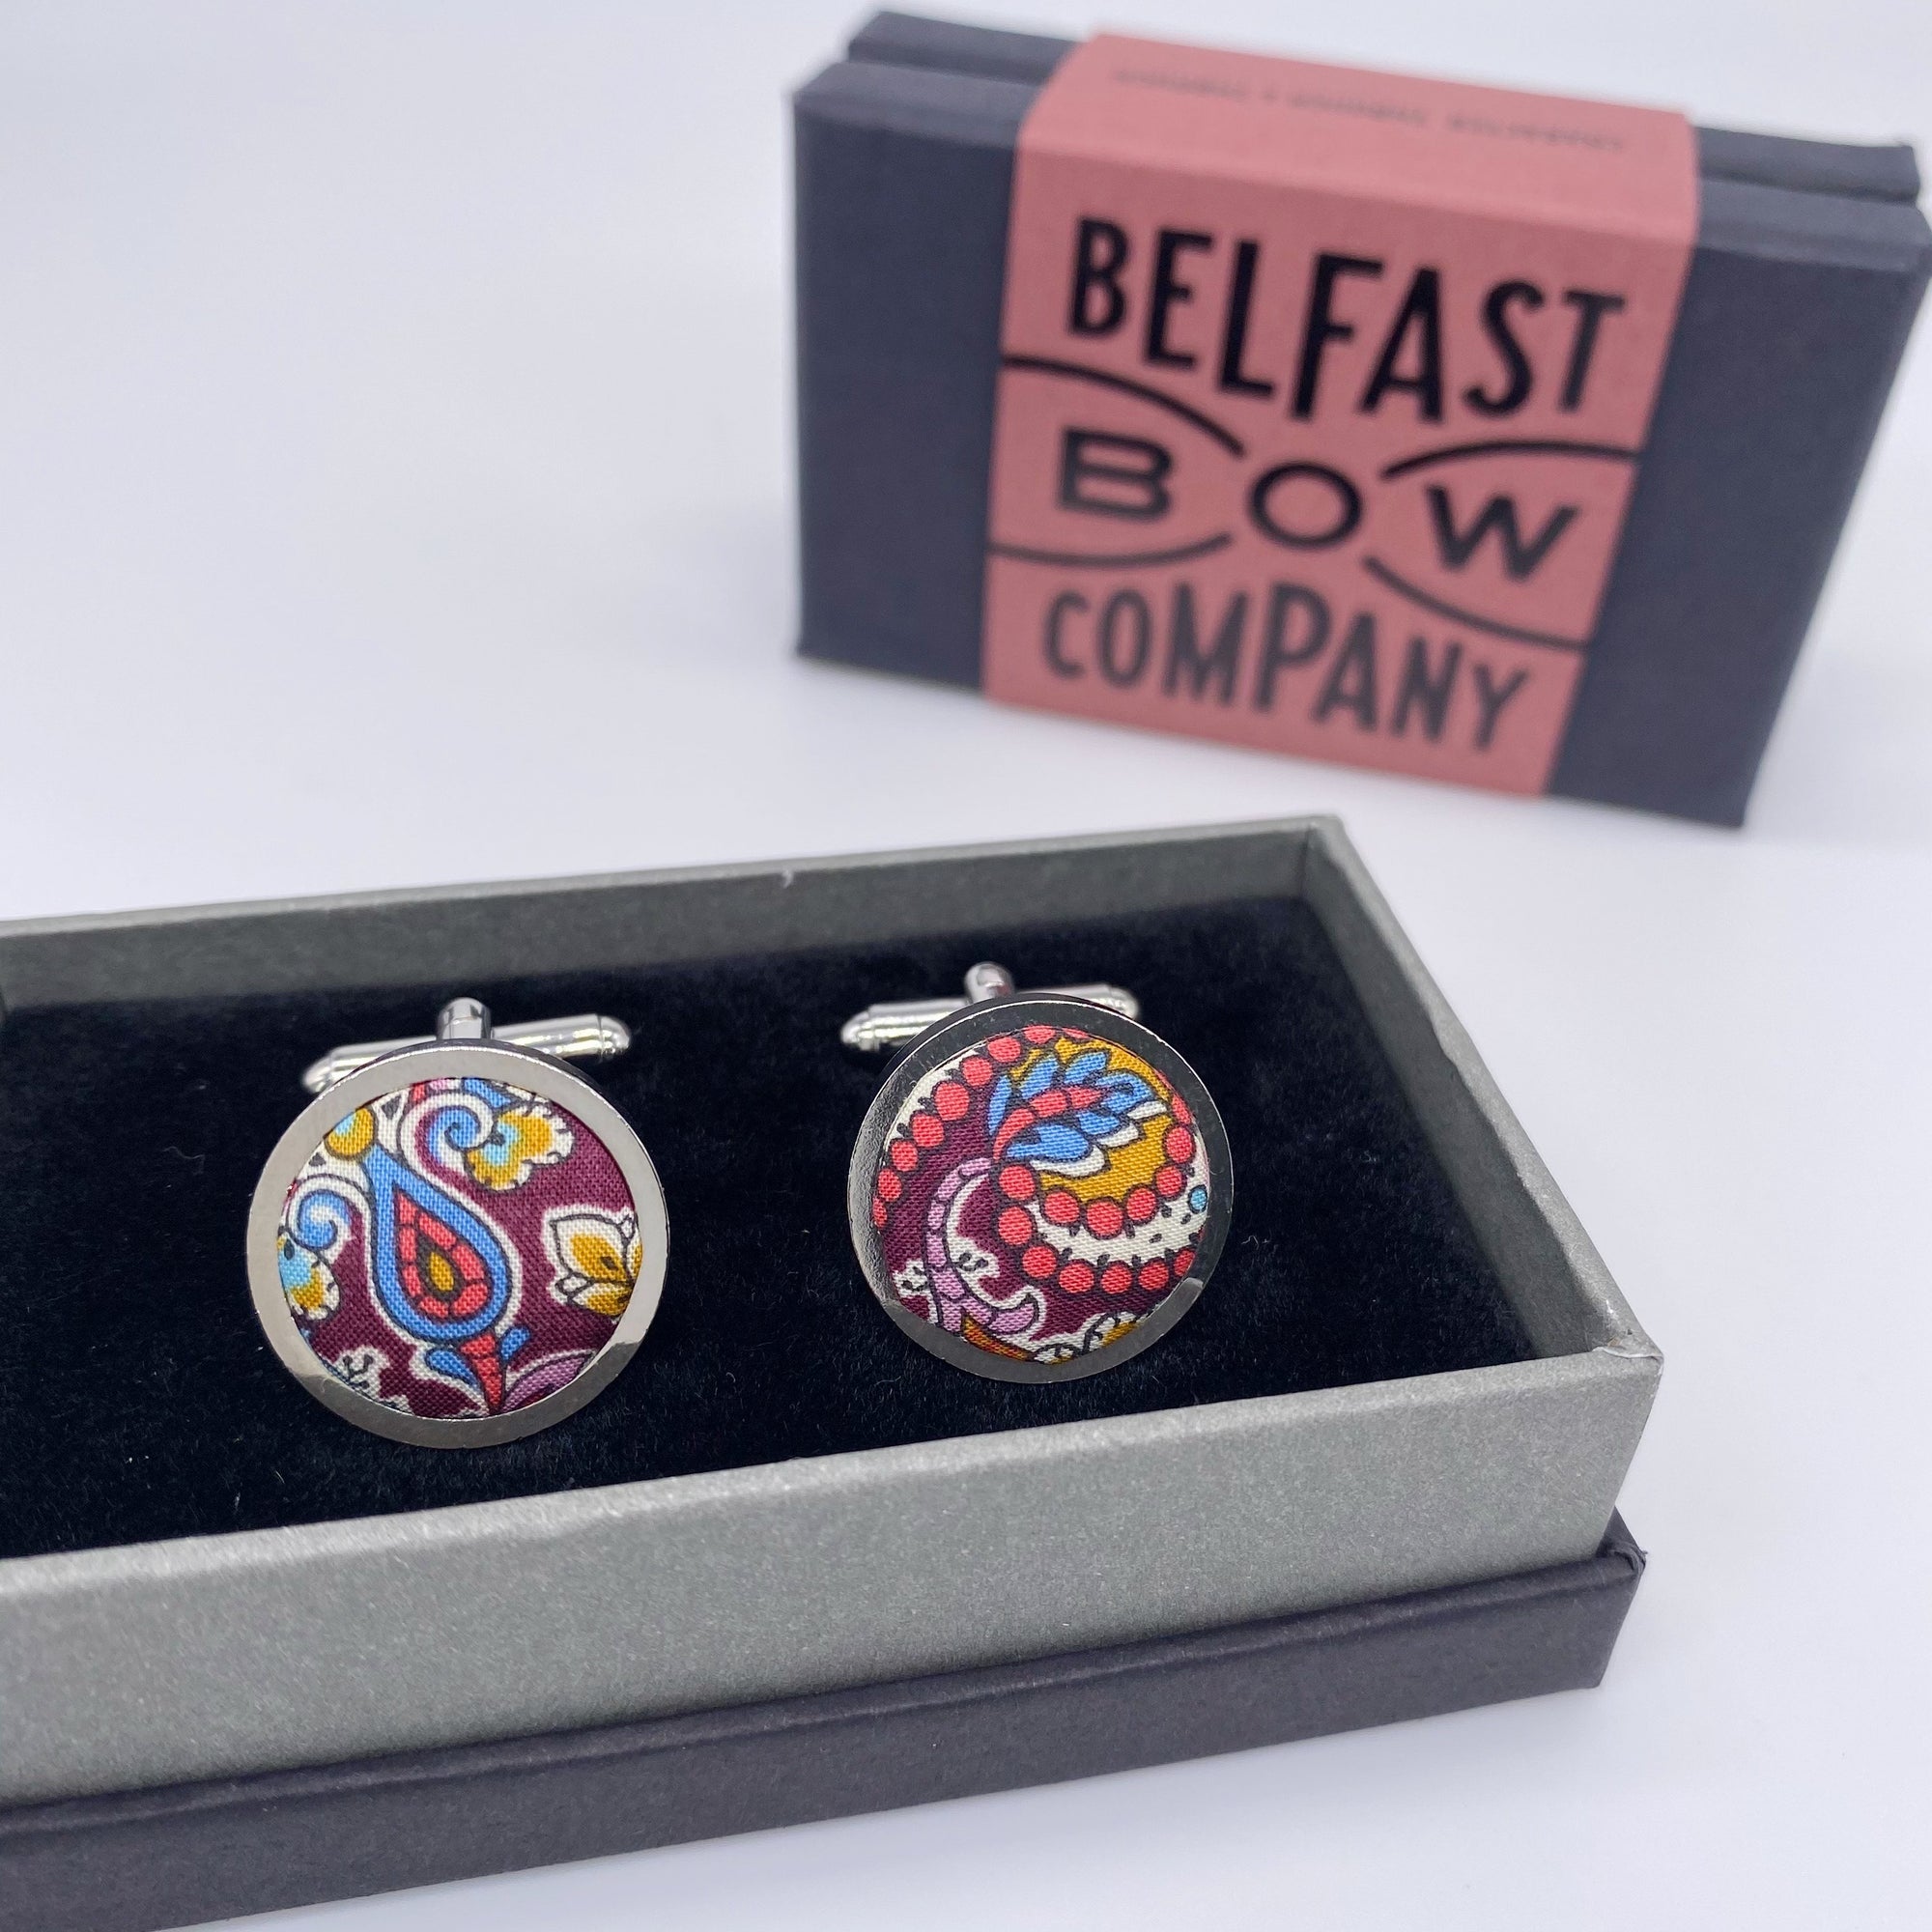 Liberty of London Cufflinks in Burgundy Paisley by the Belfast Bow Company